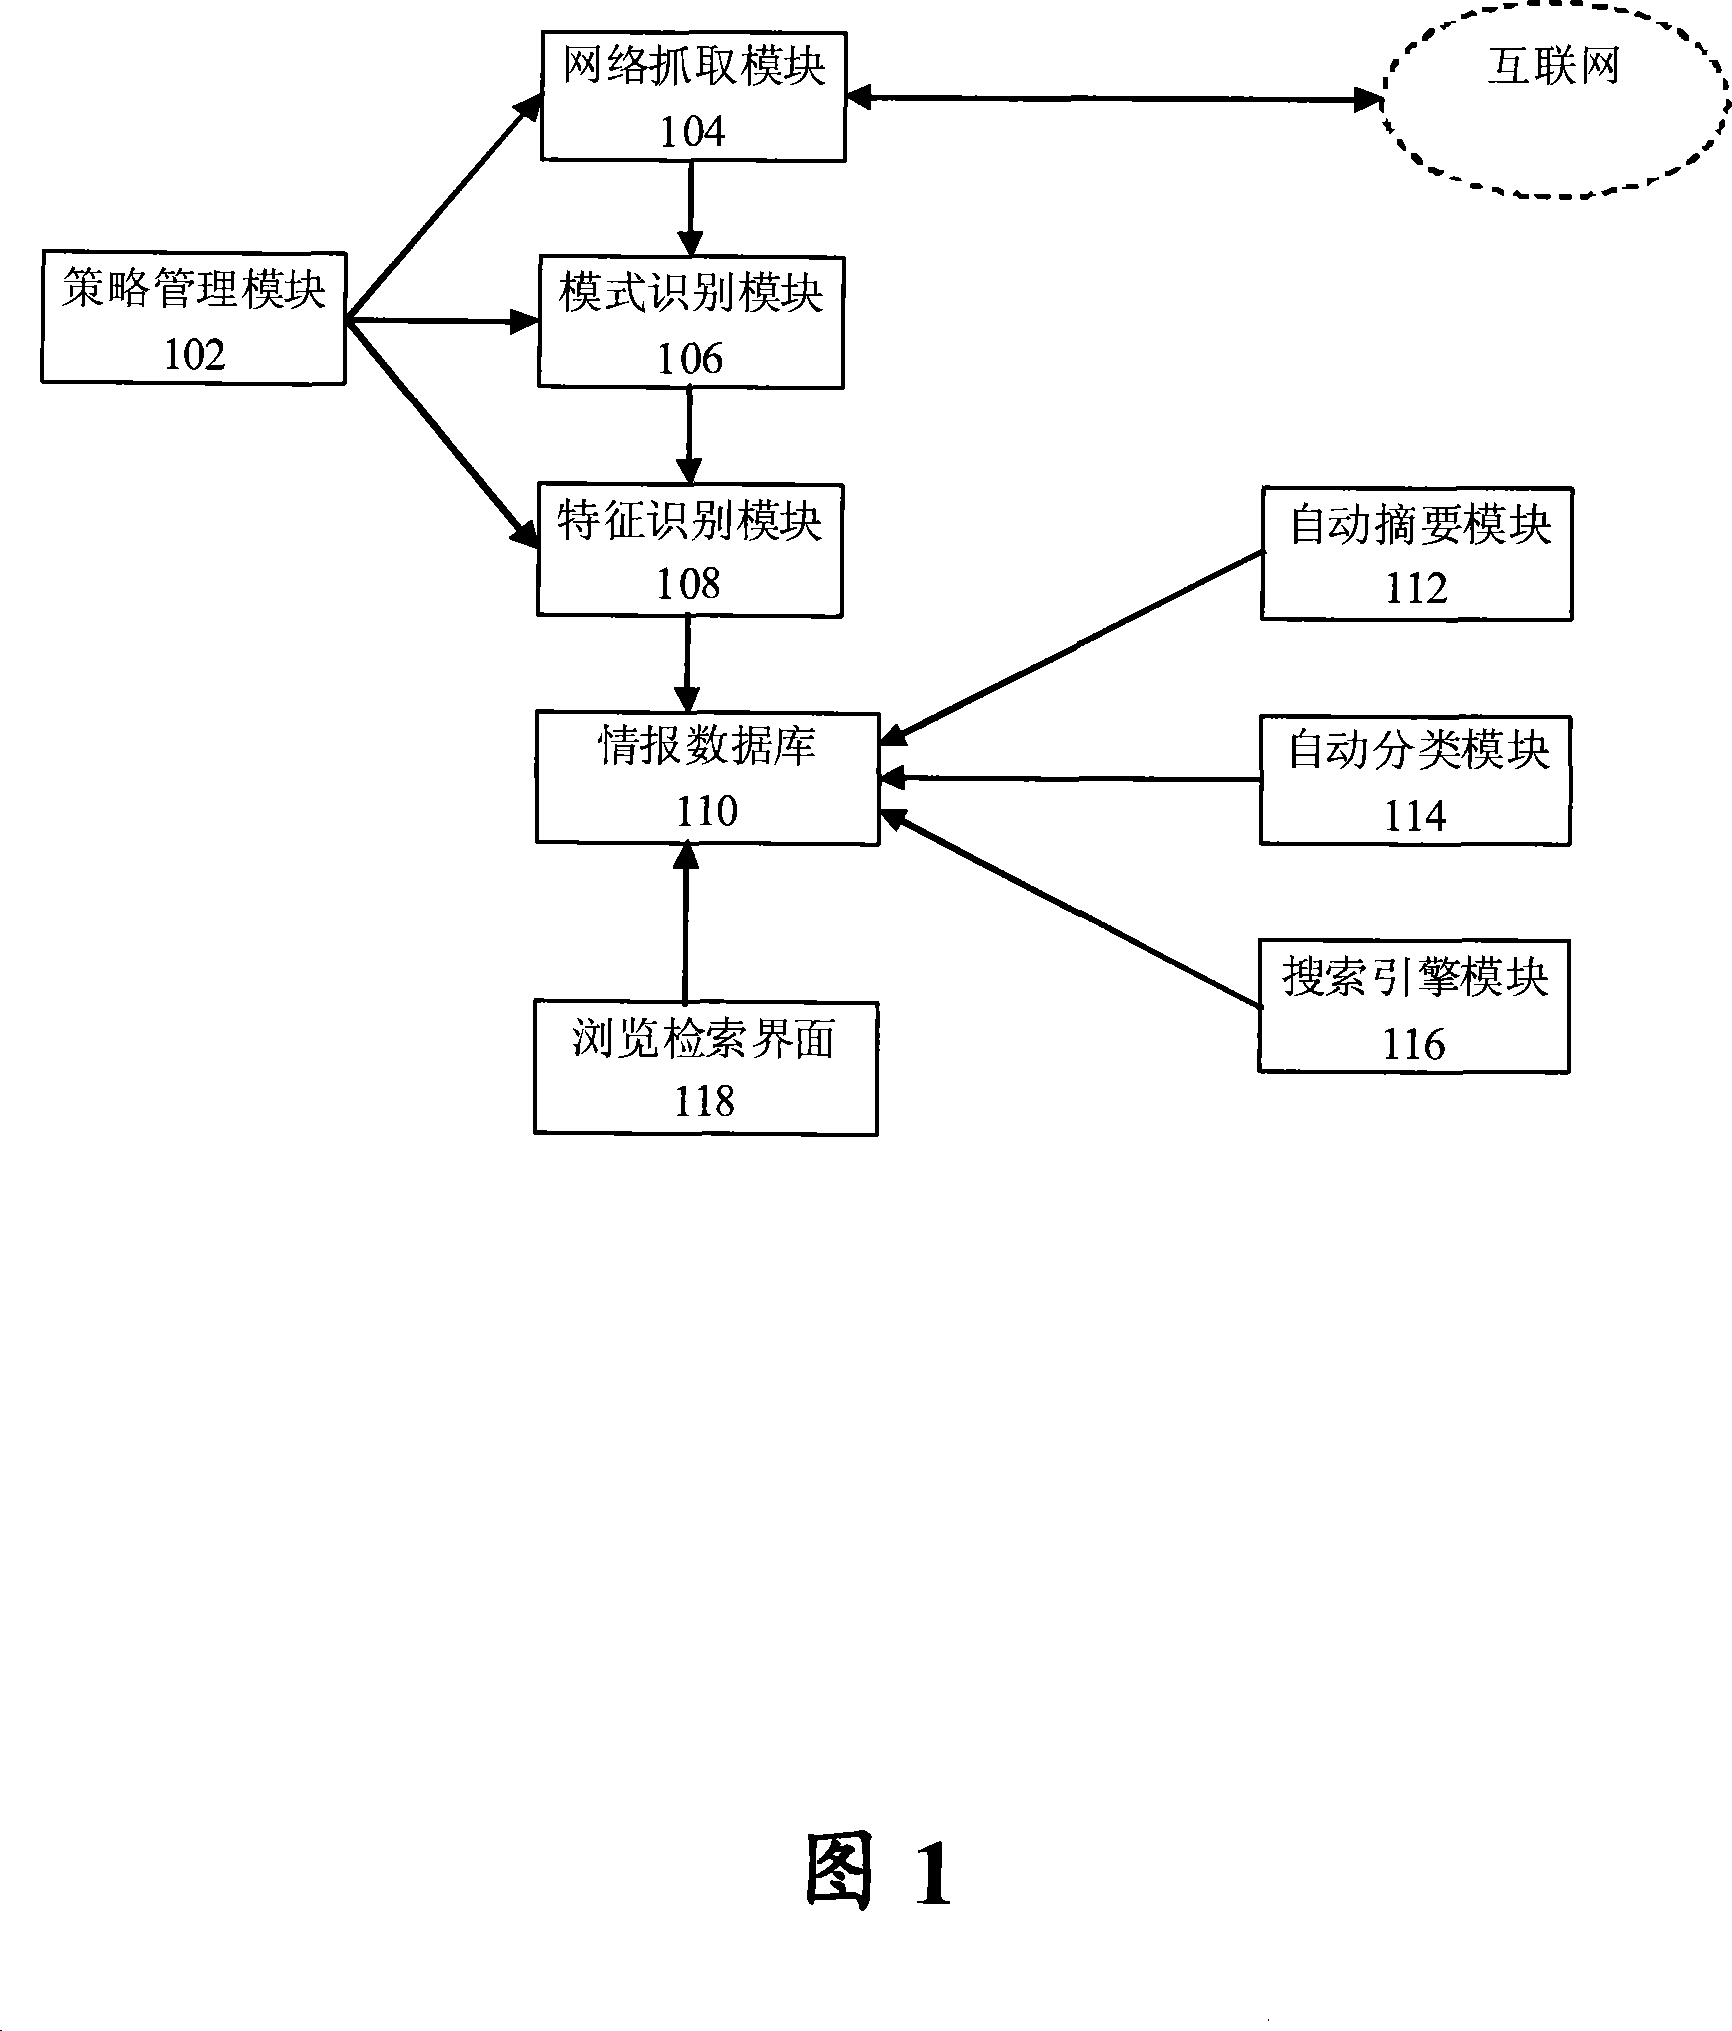 Information acquisition processing and retrieval system